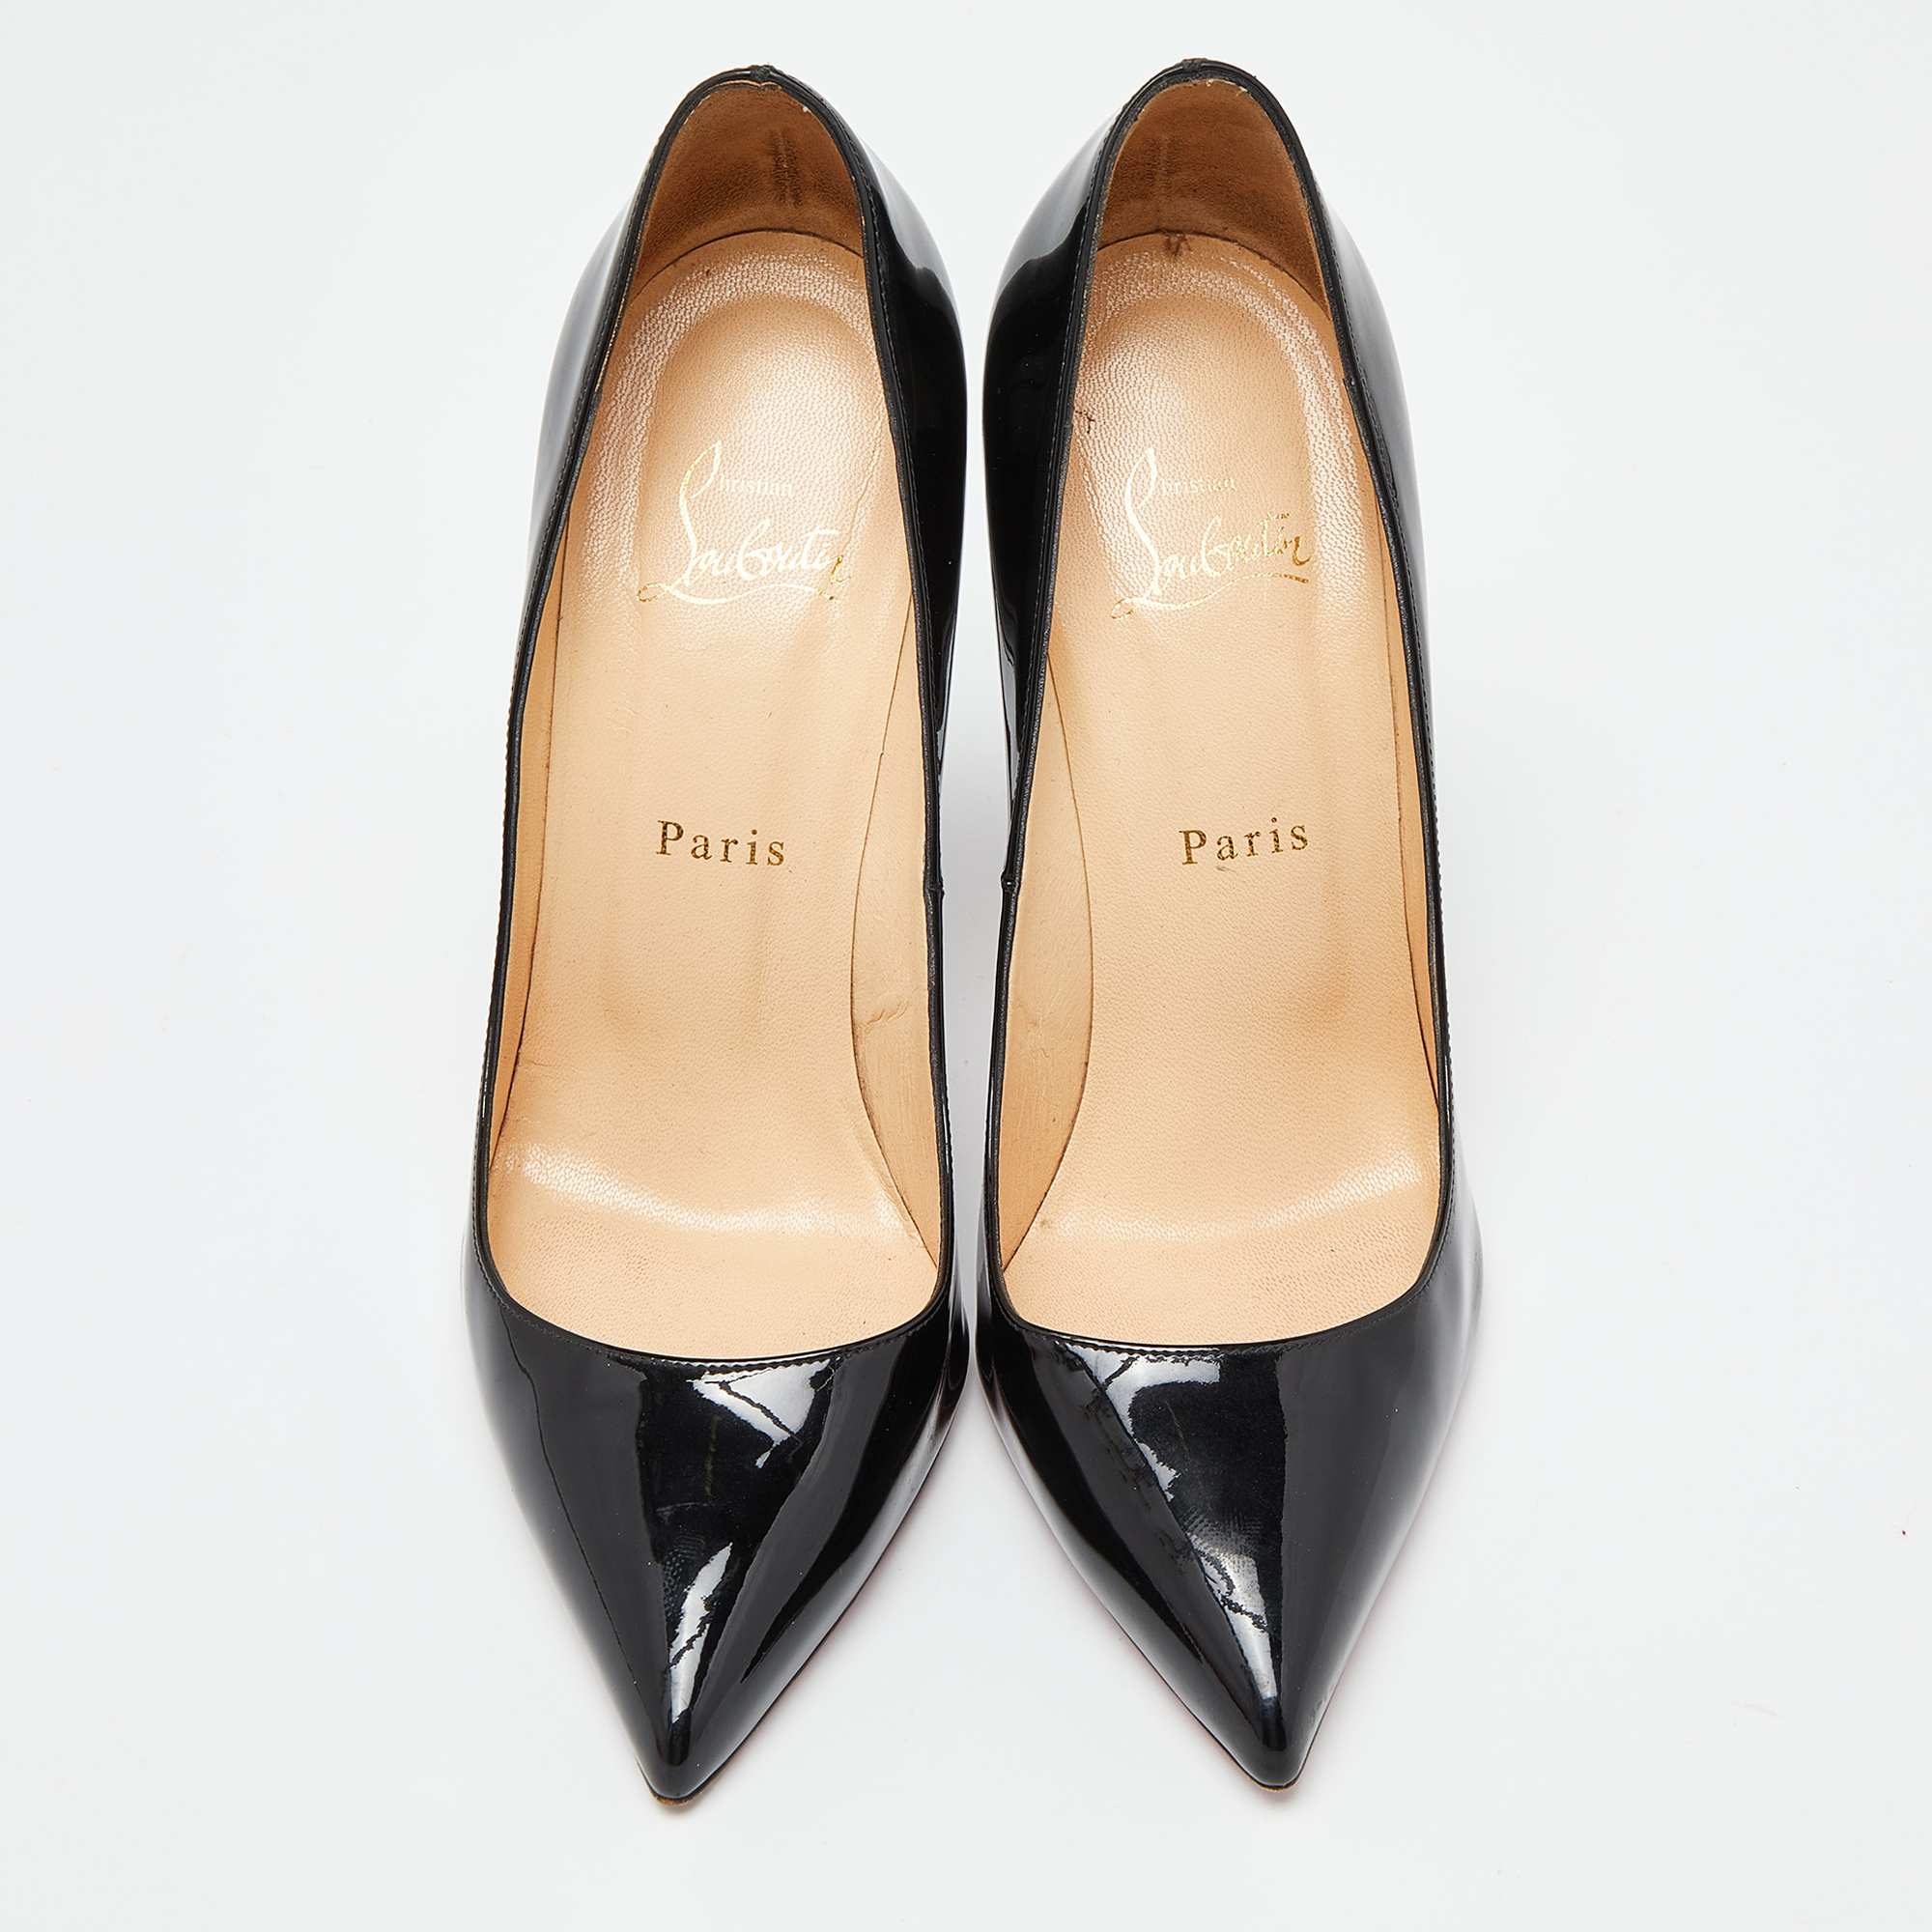 Christian Louboutin Black Patent Leather Pigalle Pointed Toe Pumps Size 39.5